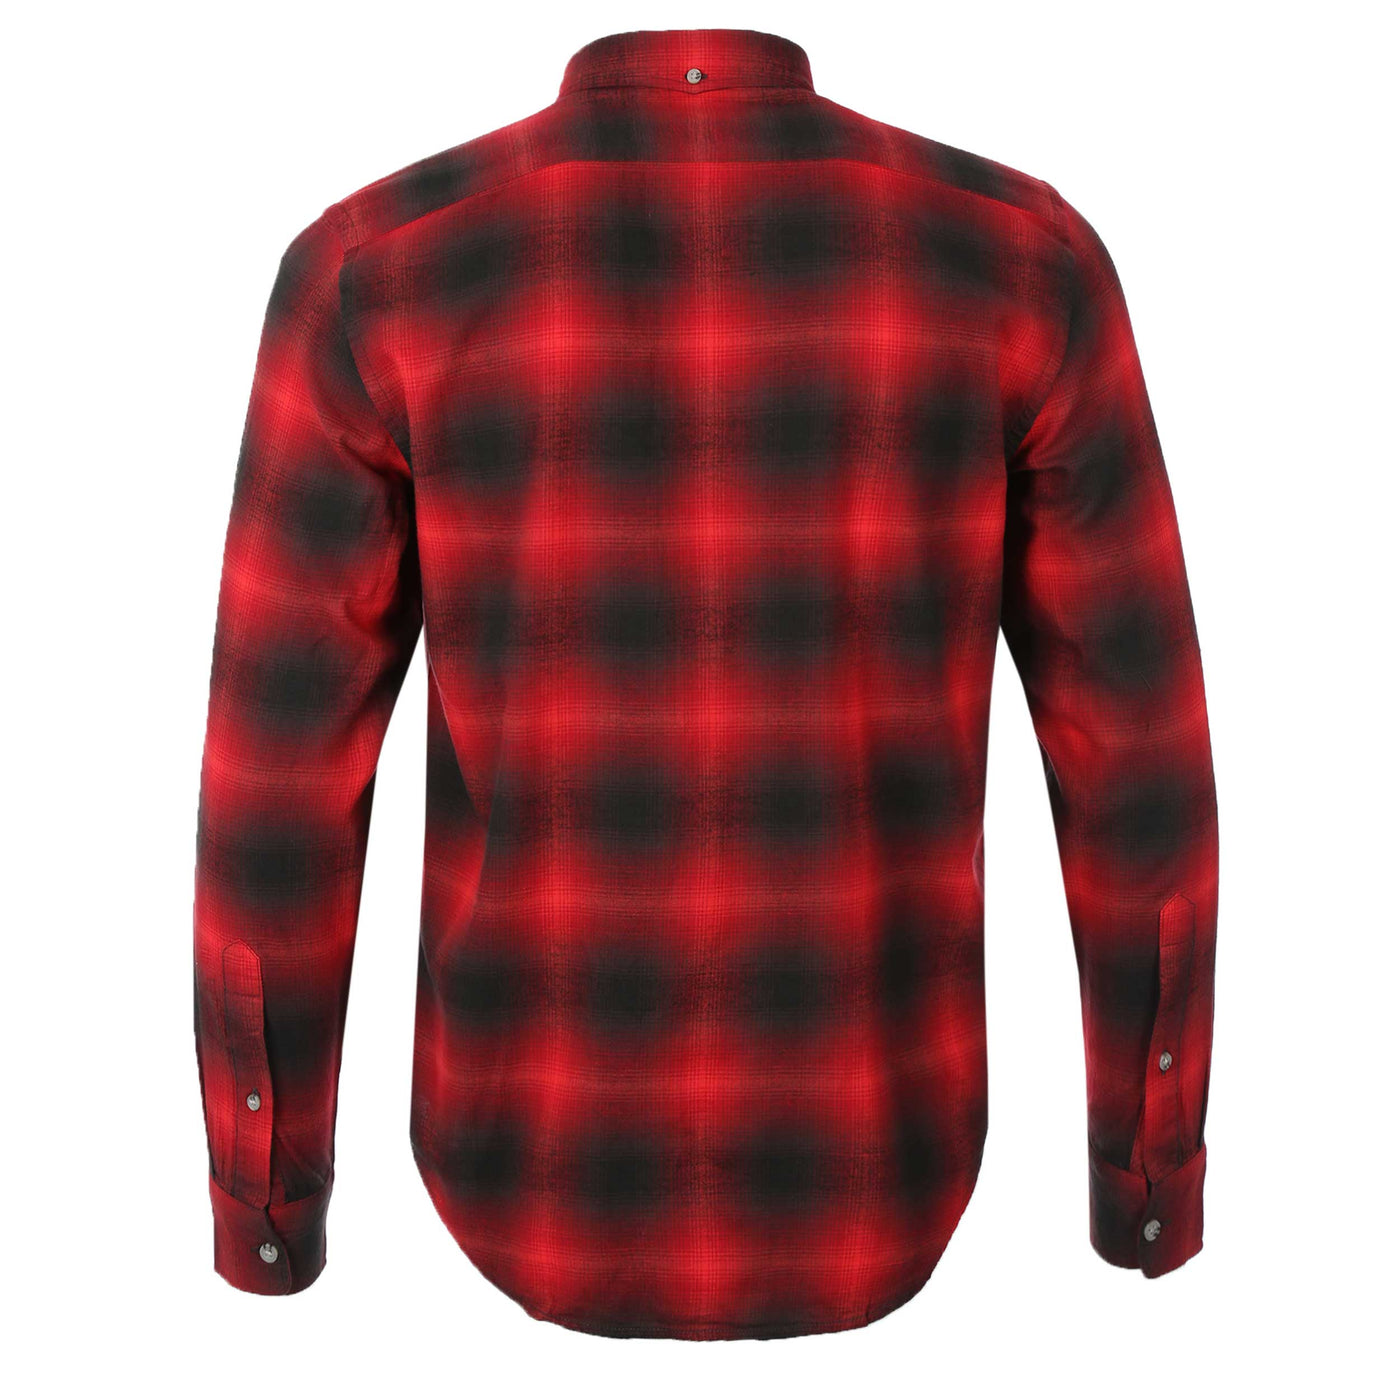 Woolrich Light Flannel Check Shirt in Red Check Back